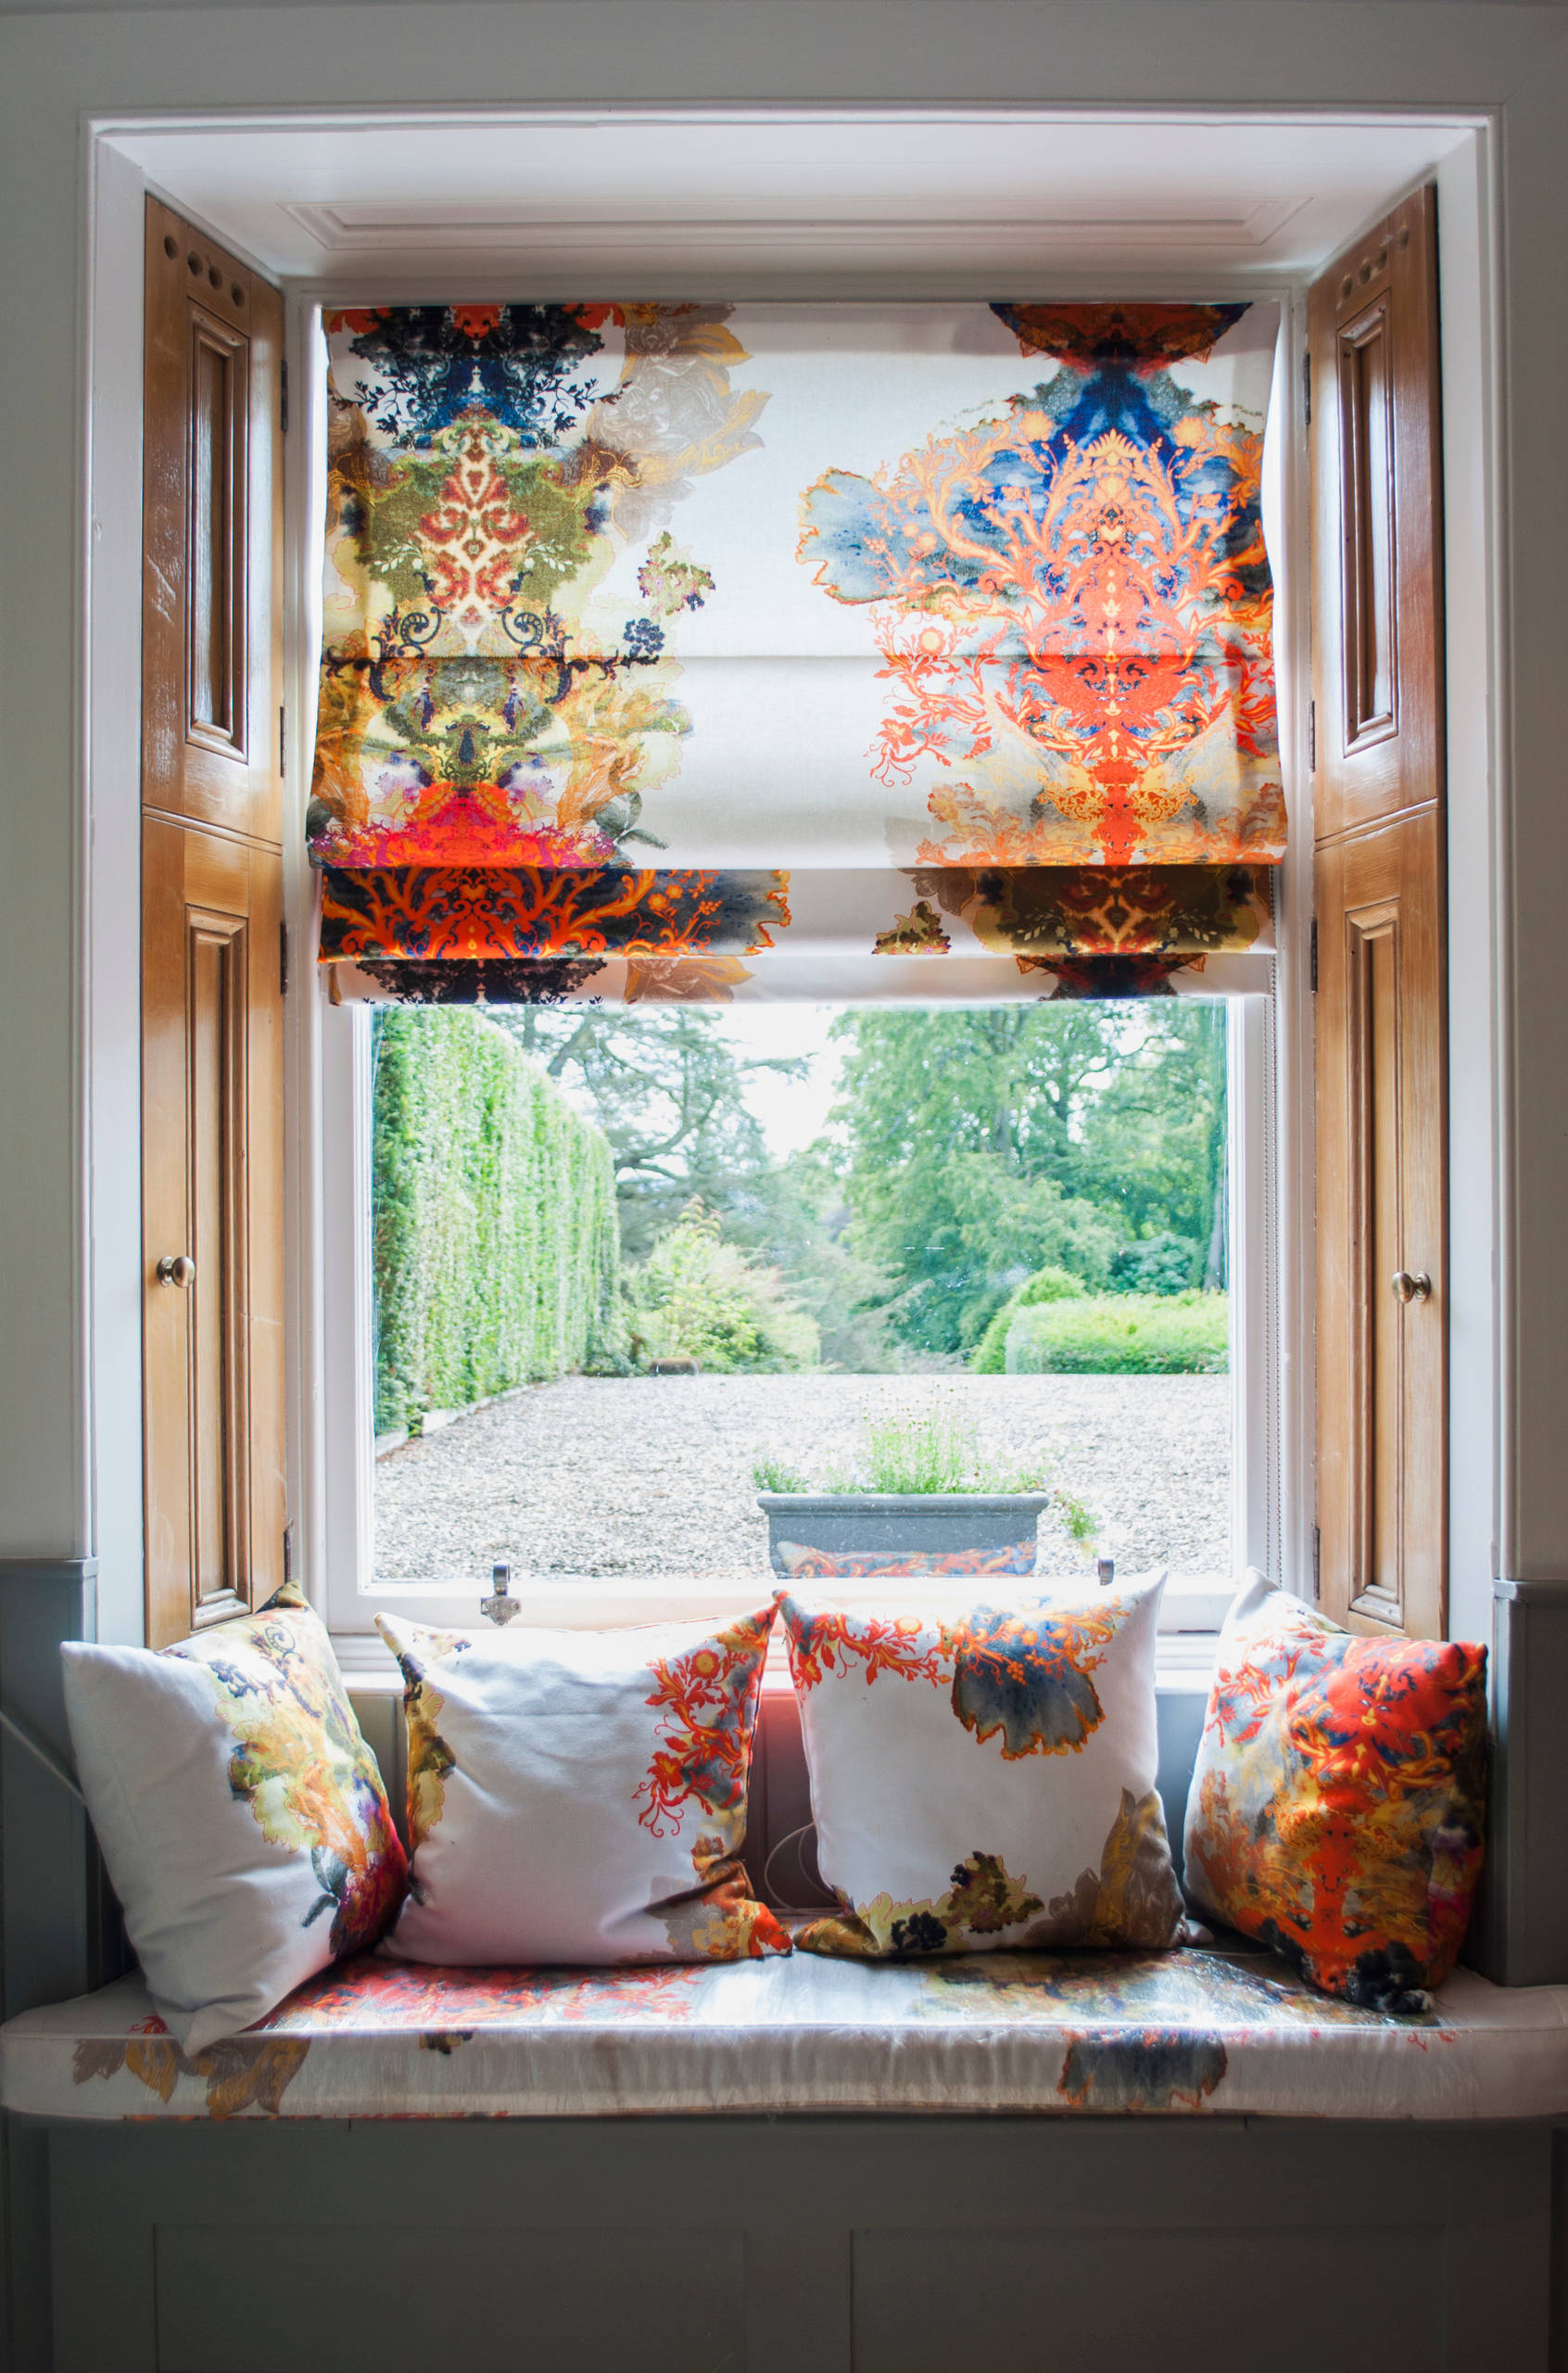 Decorating: How Can I Use Roman Blinds to Best Effect? | Houzz UK